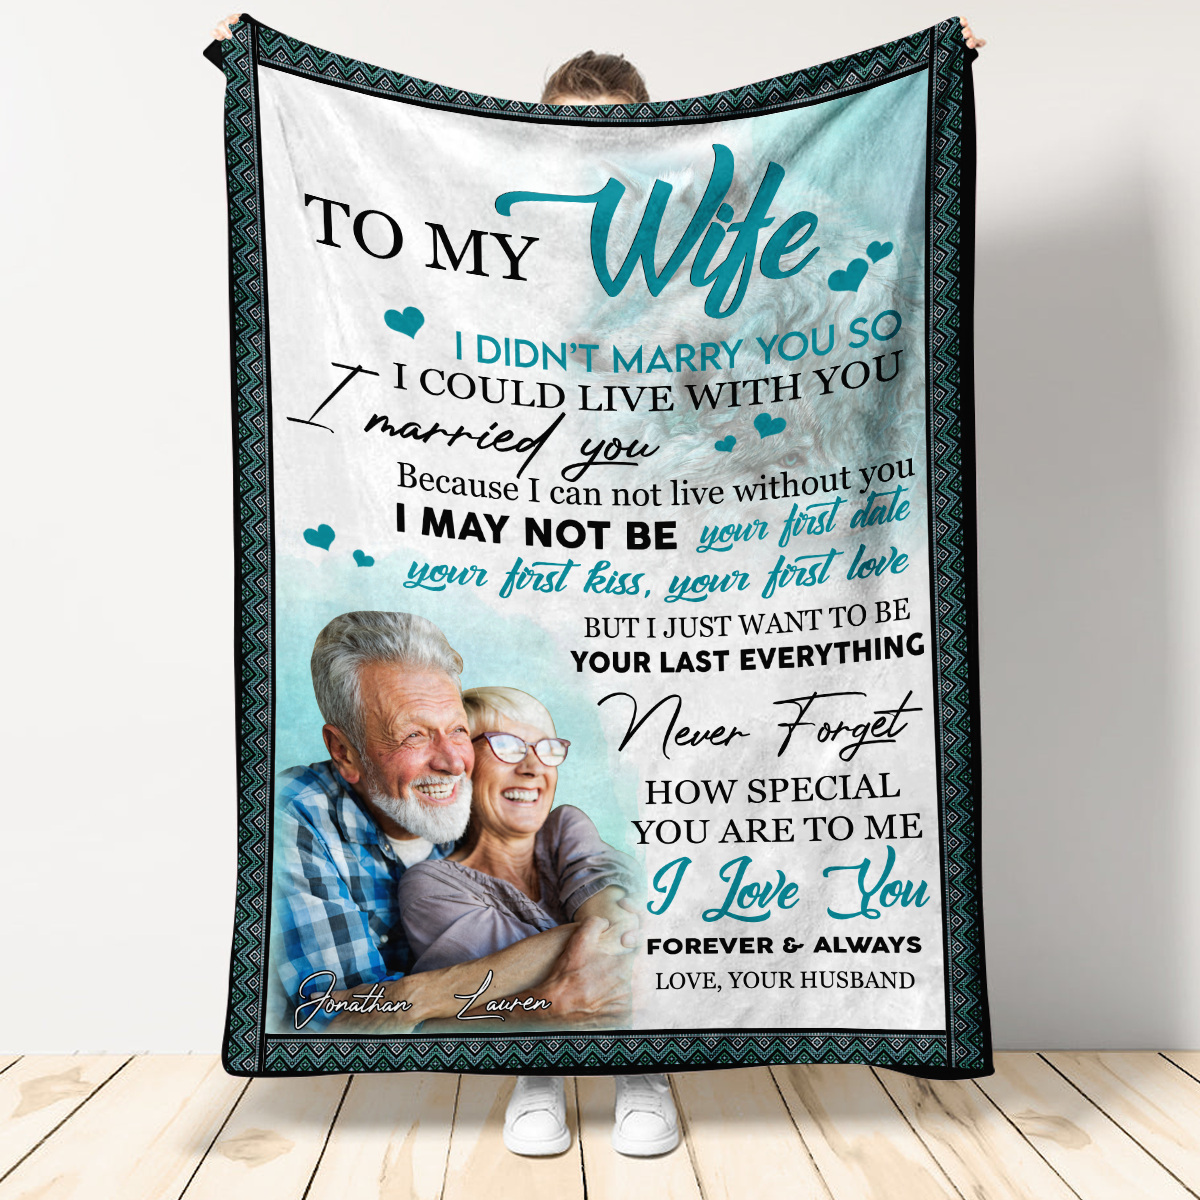 Personalized Photo Blankets - To My Wife How Special You Are To Me - Husband To Wife, Mother's Day Gift For Wife